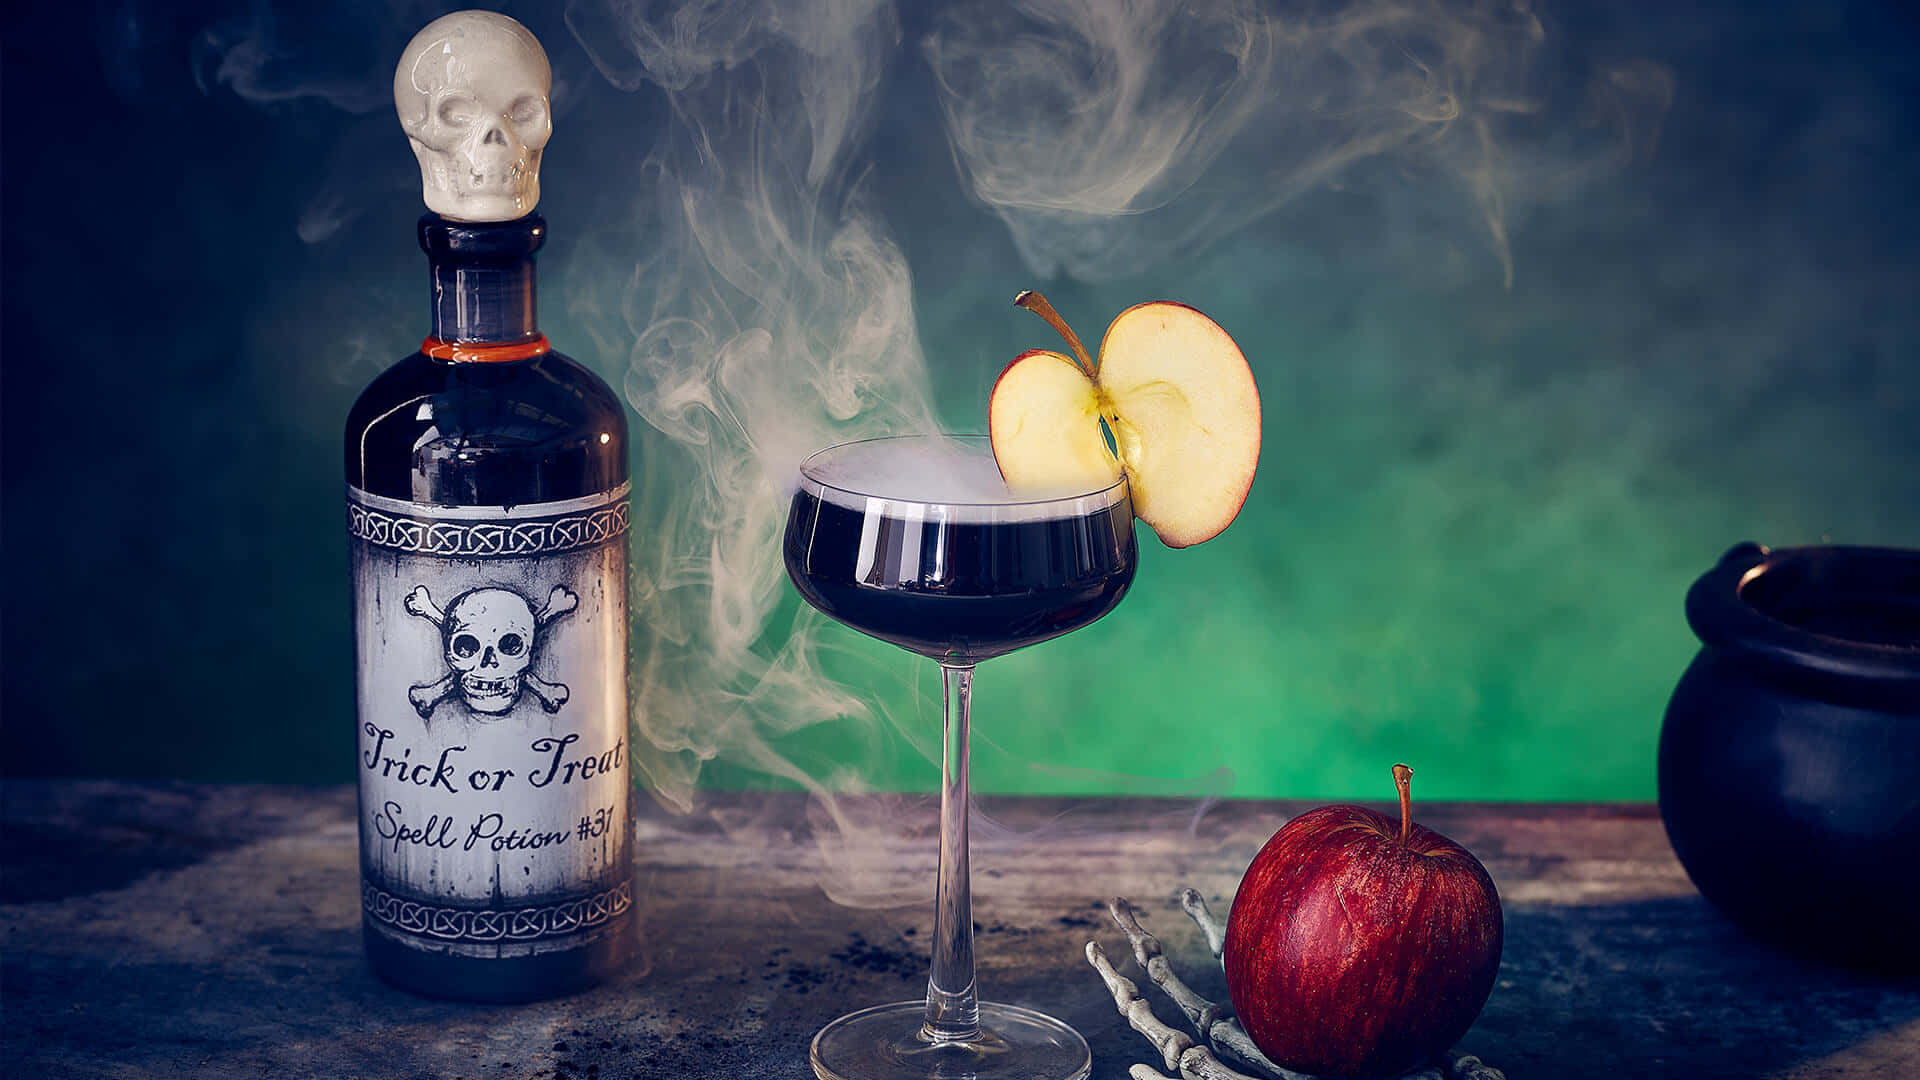 A spooky surprise for Halloween - try these delicious Halloween Cocktails for a festive twist! Wallpaper